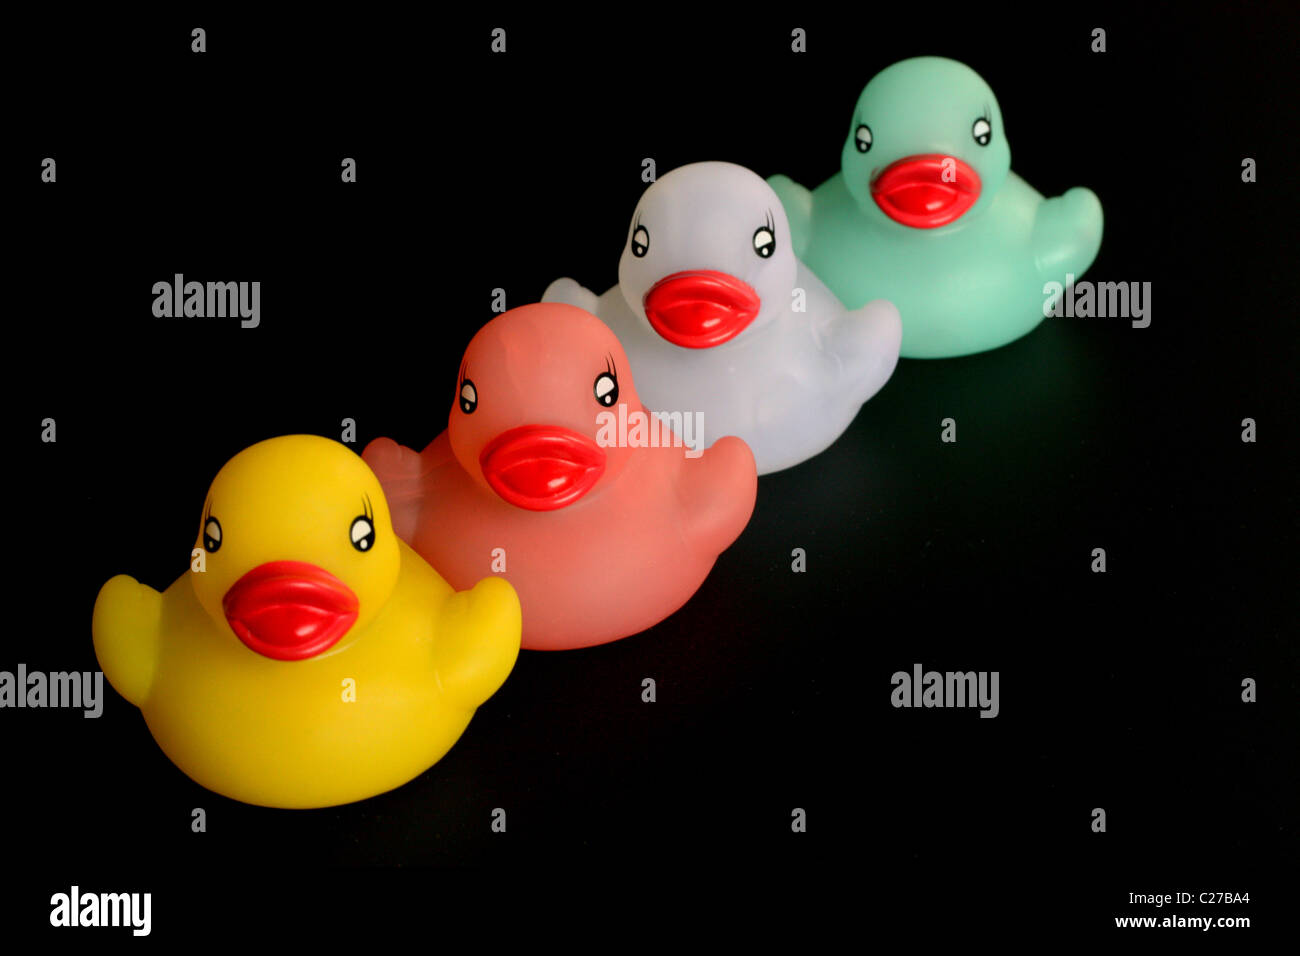 Four rubber ducks in a row Stock Photo